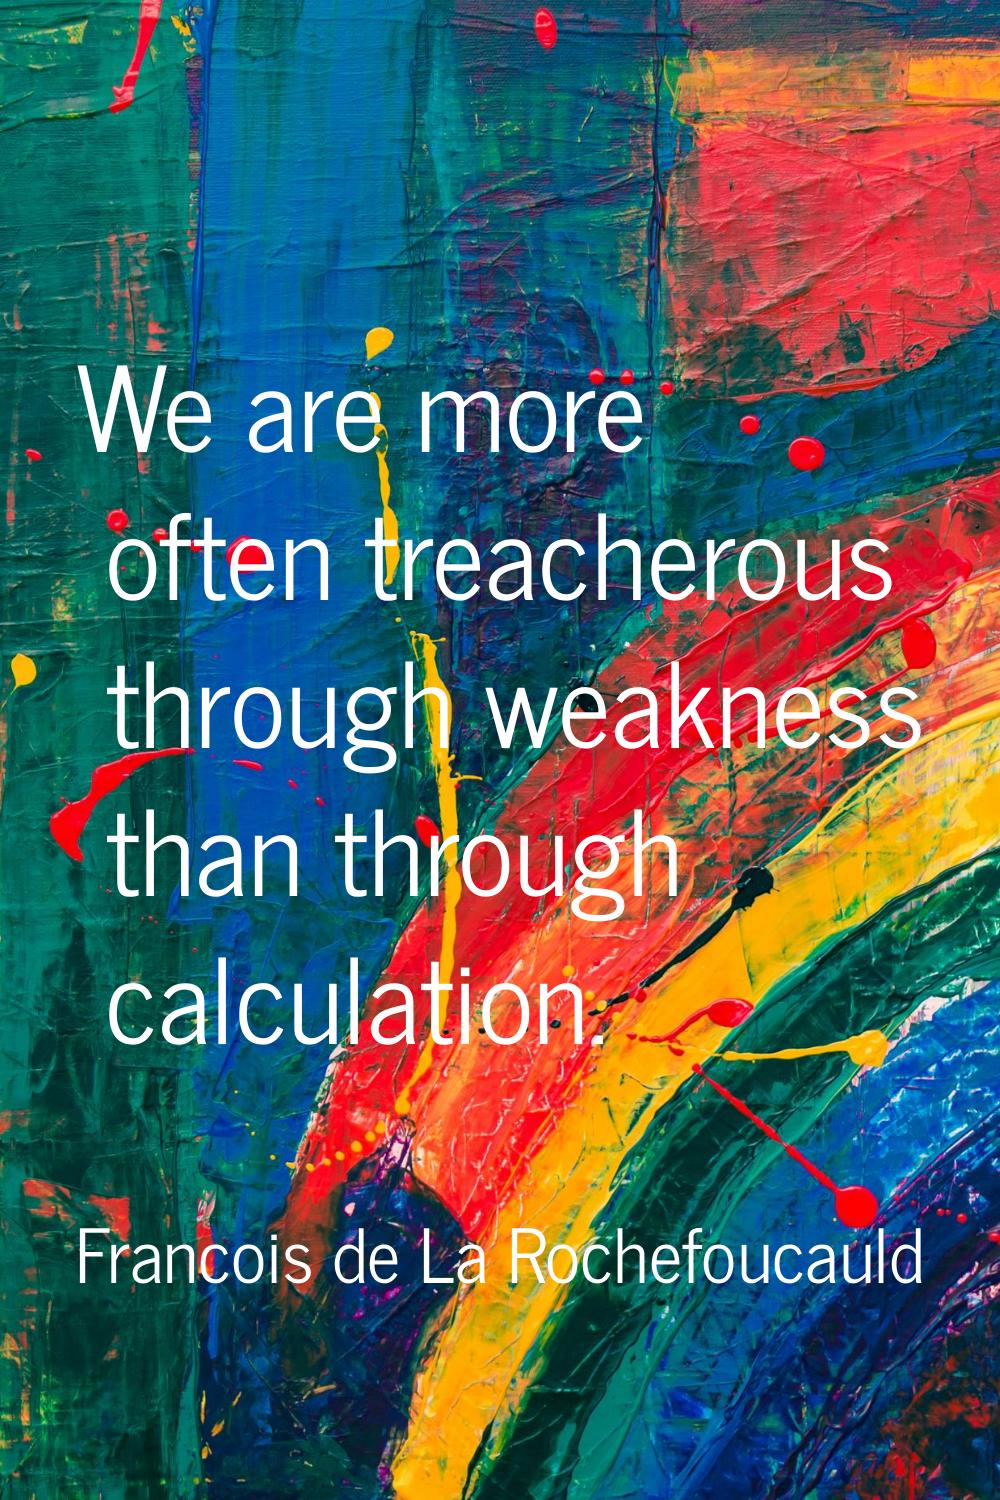 We are more often treacherous through weakness than through calculation.